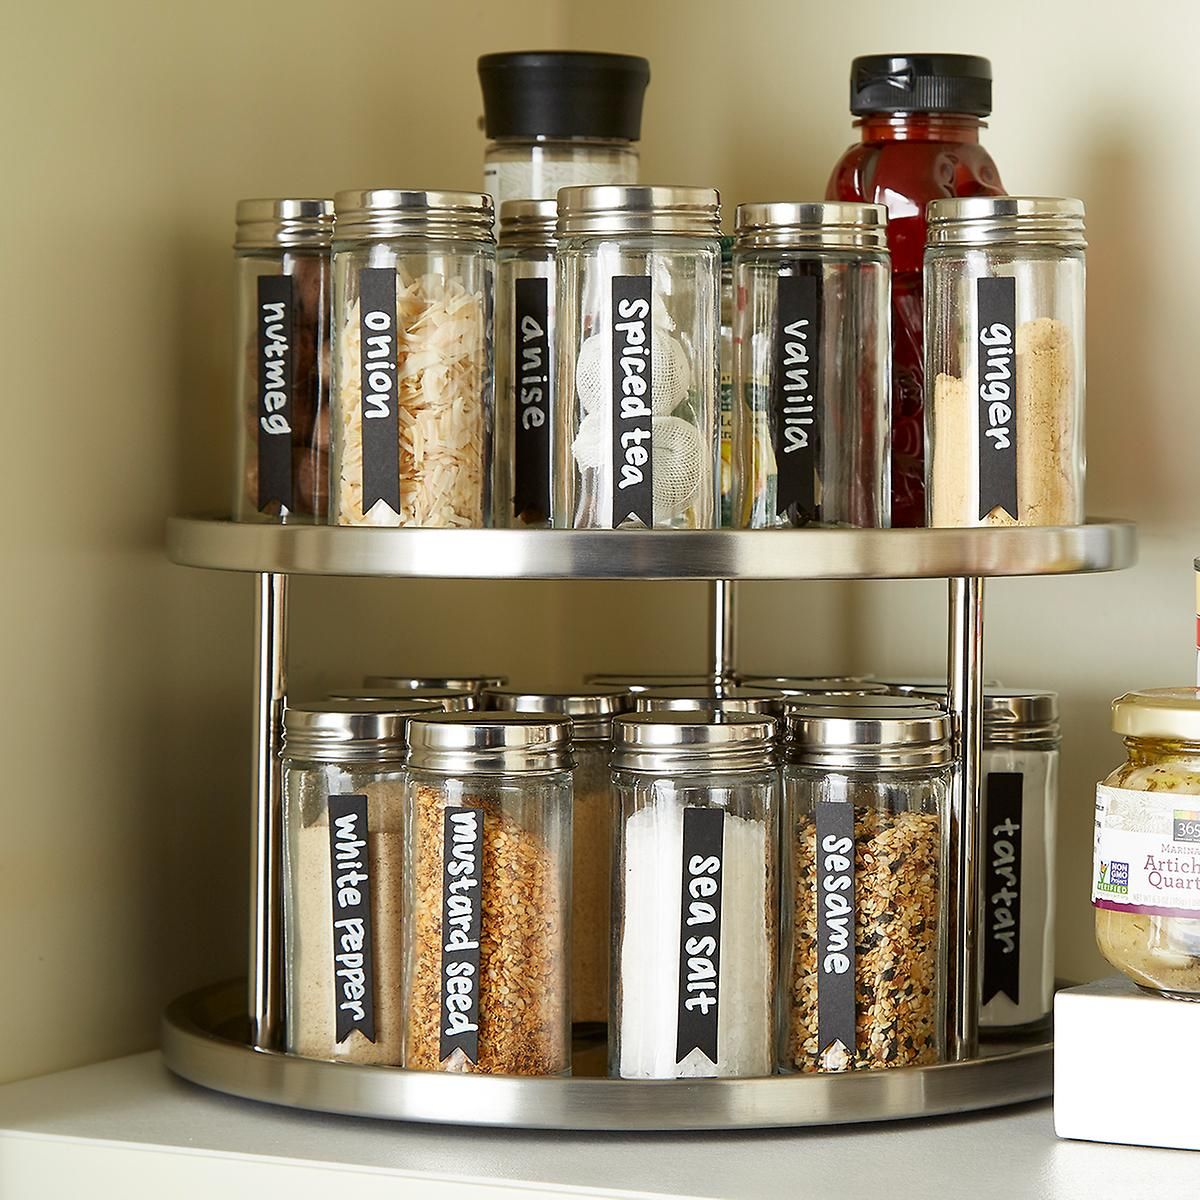 2-Tier Stainless Steel Lazy Susan | The Container Store